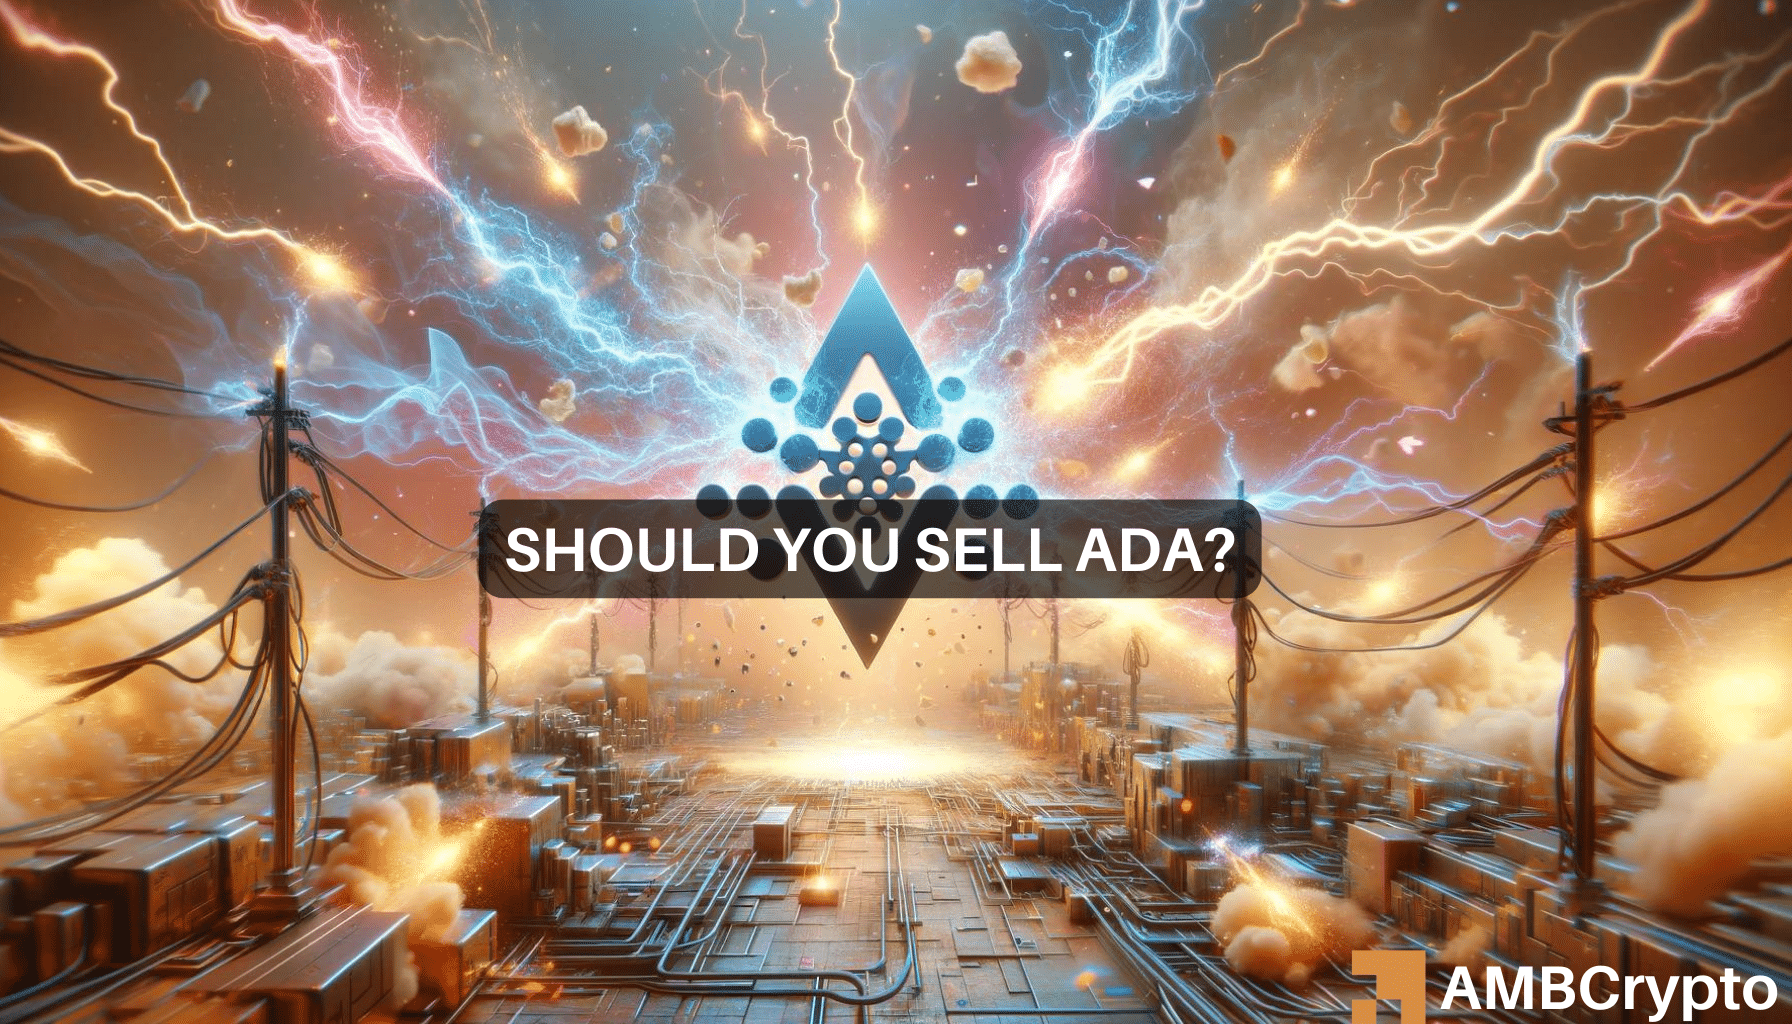 Cardano's short positions increase: What should you do with your ADA?